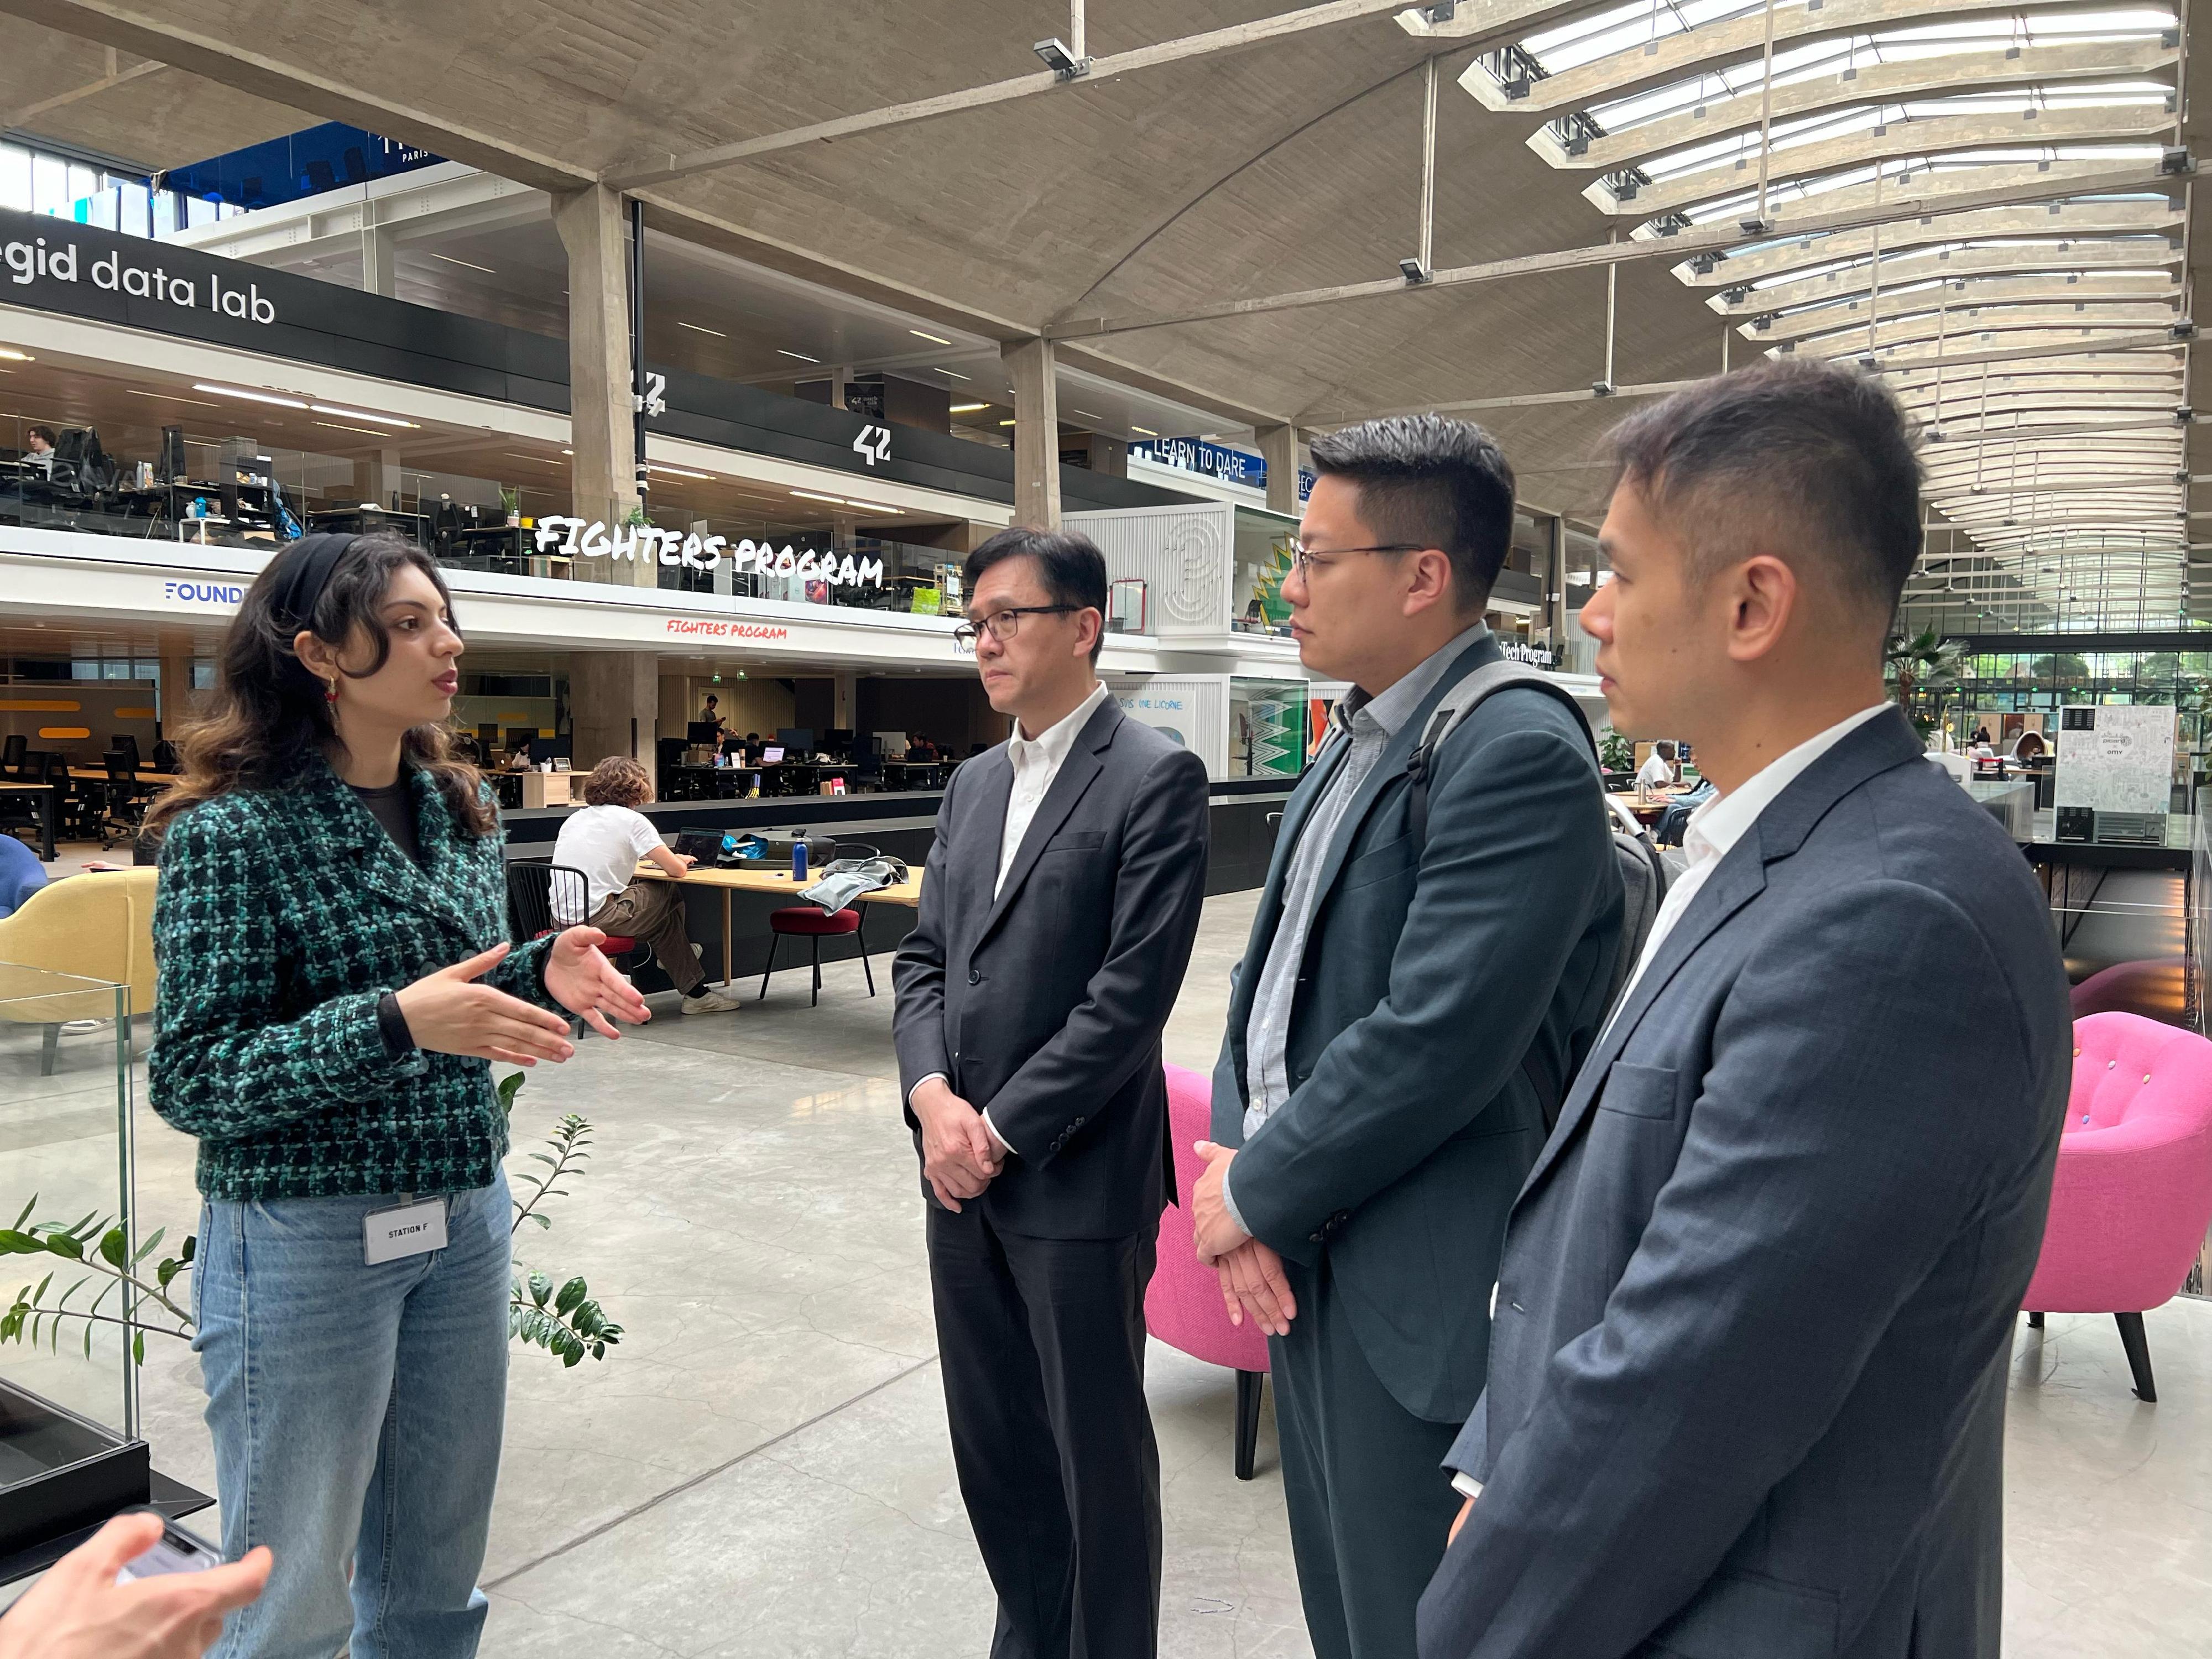 The Secretary for Innovation, Technology and Industry, Professor Sun Dong (second left), visited Station F, a start-up park in the city centre of Paris, on May 24 (Paris time) to learn more about its operation mode and community network.